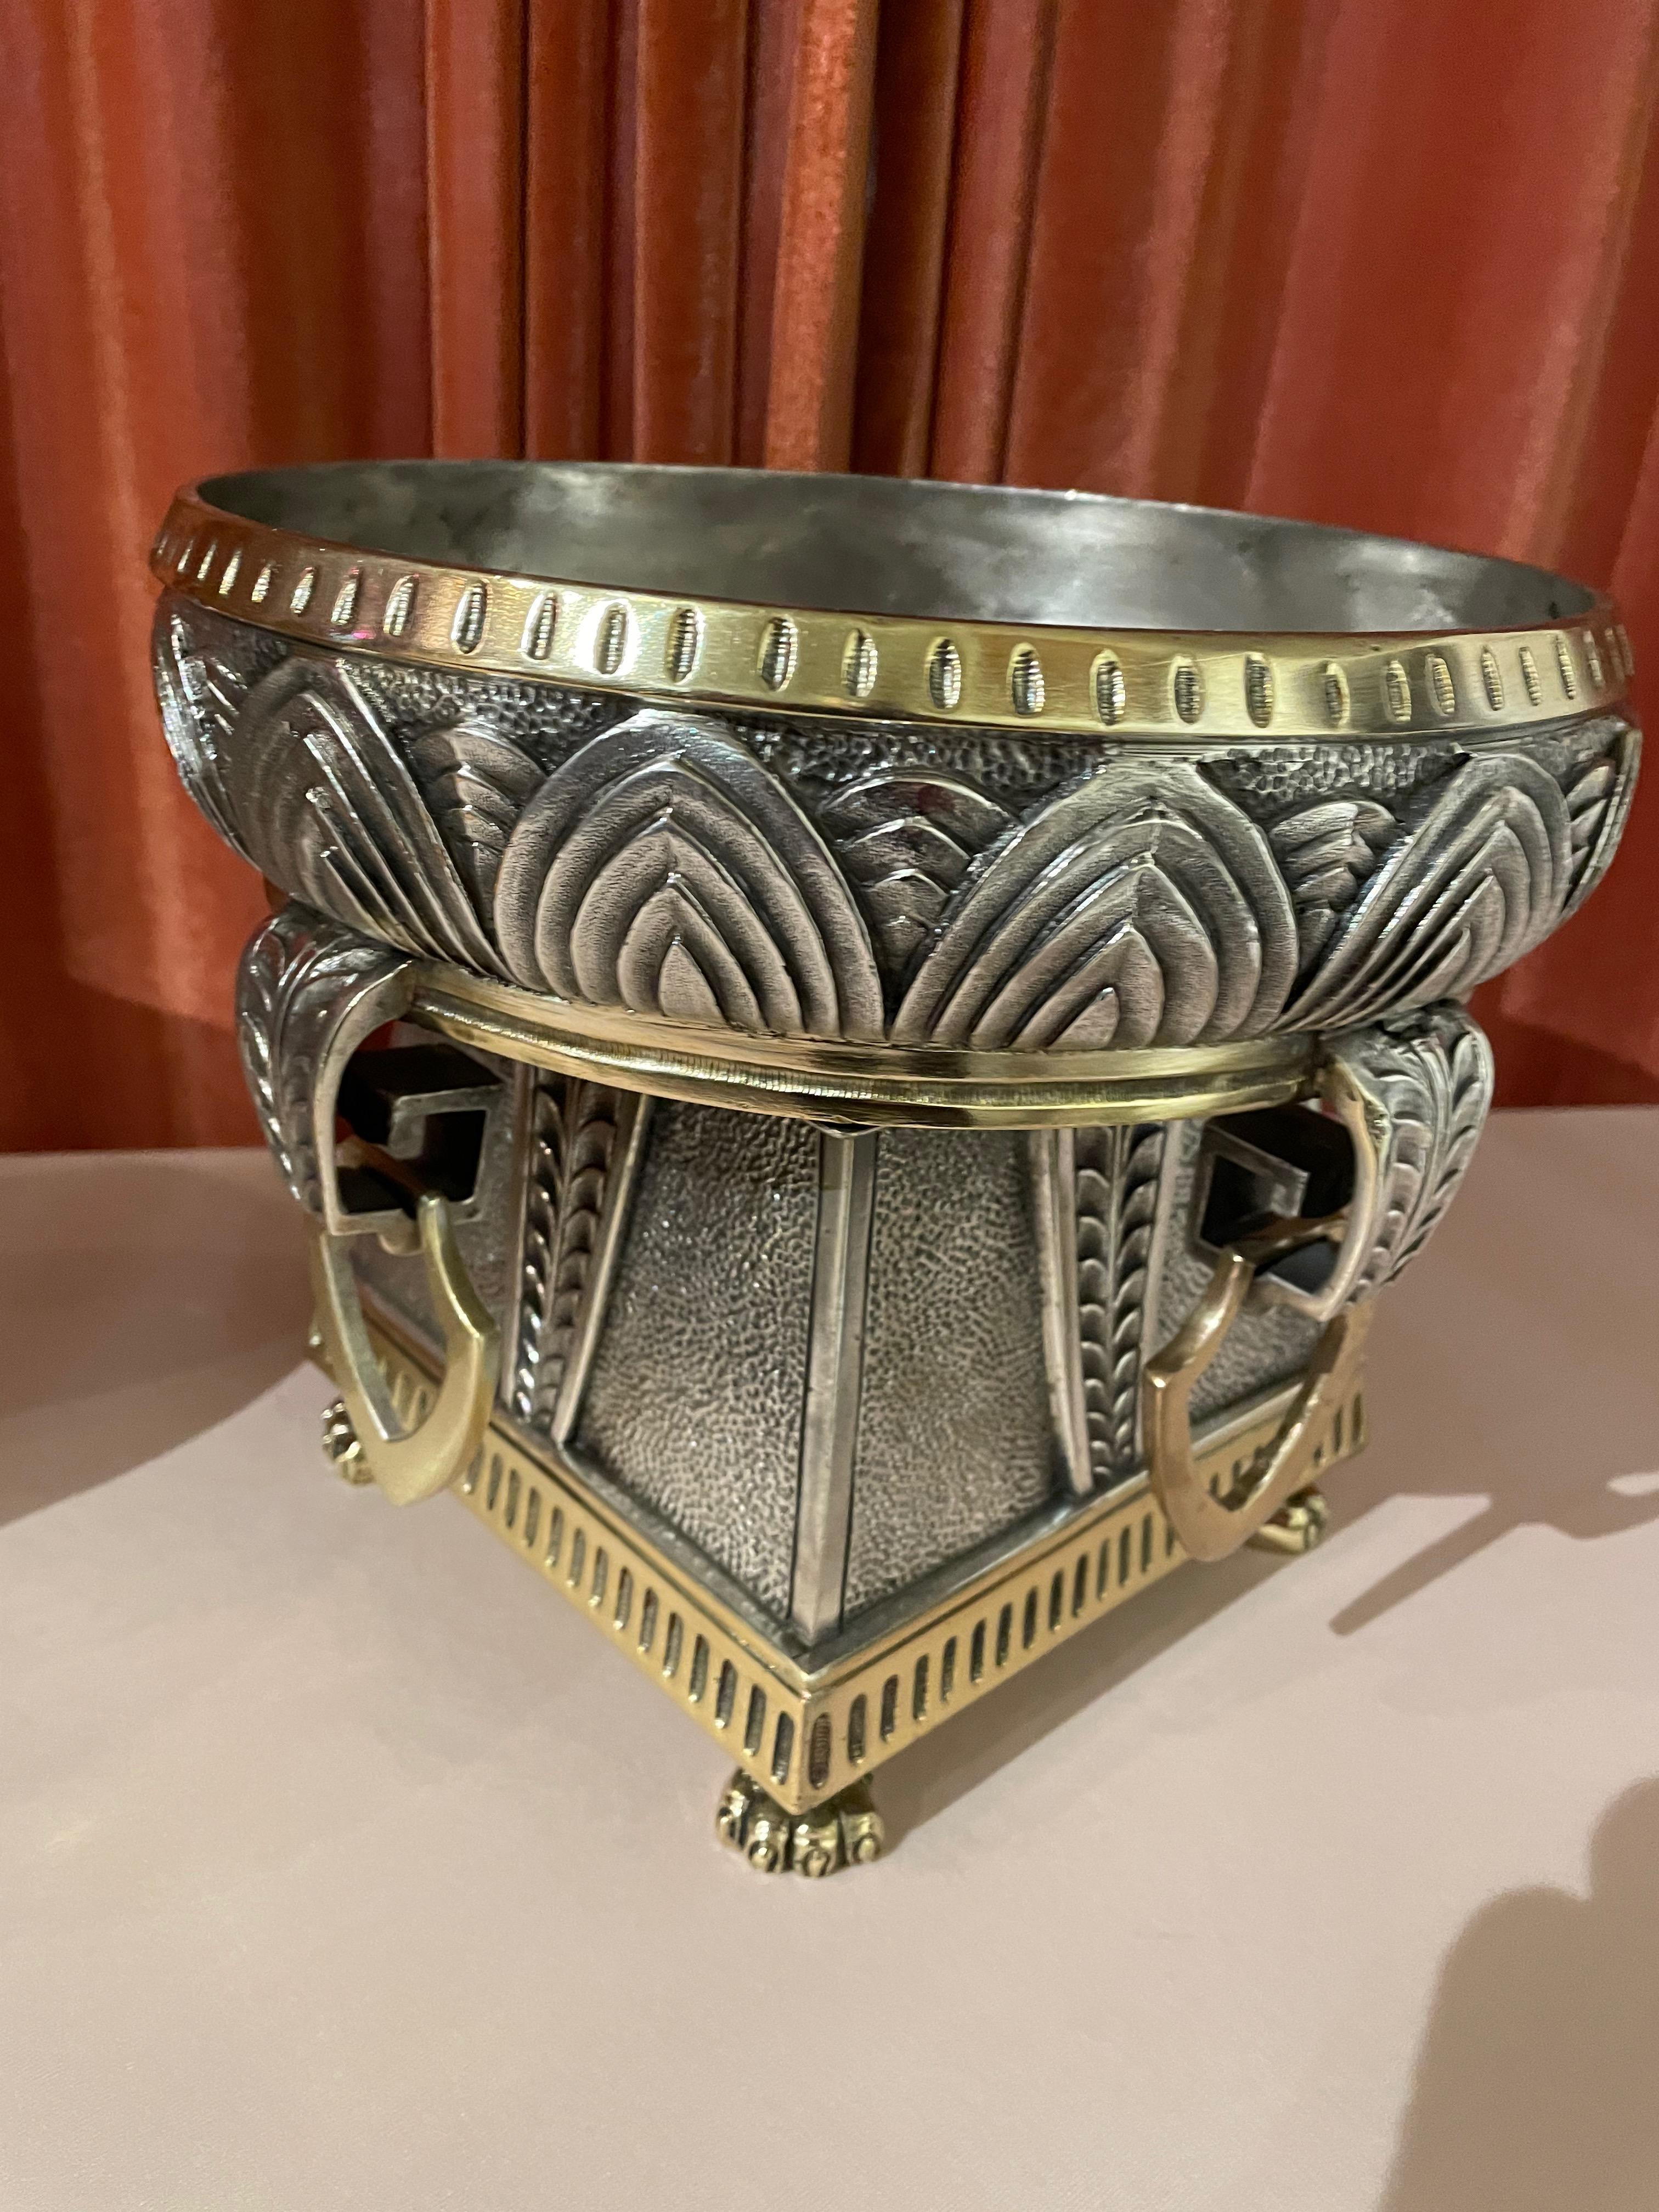 Elegant two-toned Art Deco silvered bronze jardinières with intricate detailing. The rich use of metals with great design and dimension makes this pair of planters or display bowls so very unique. The gold-toned feet, trim, and handles are in nice